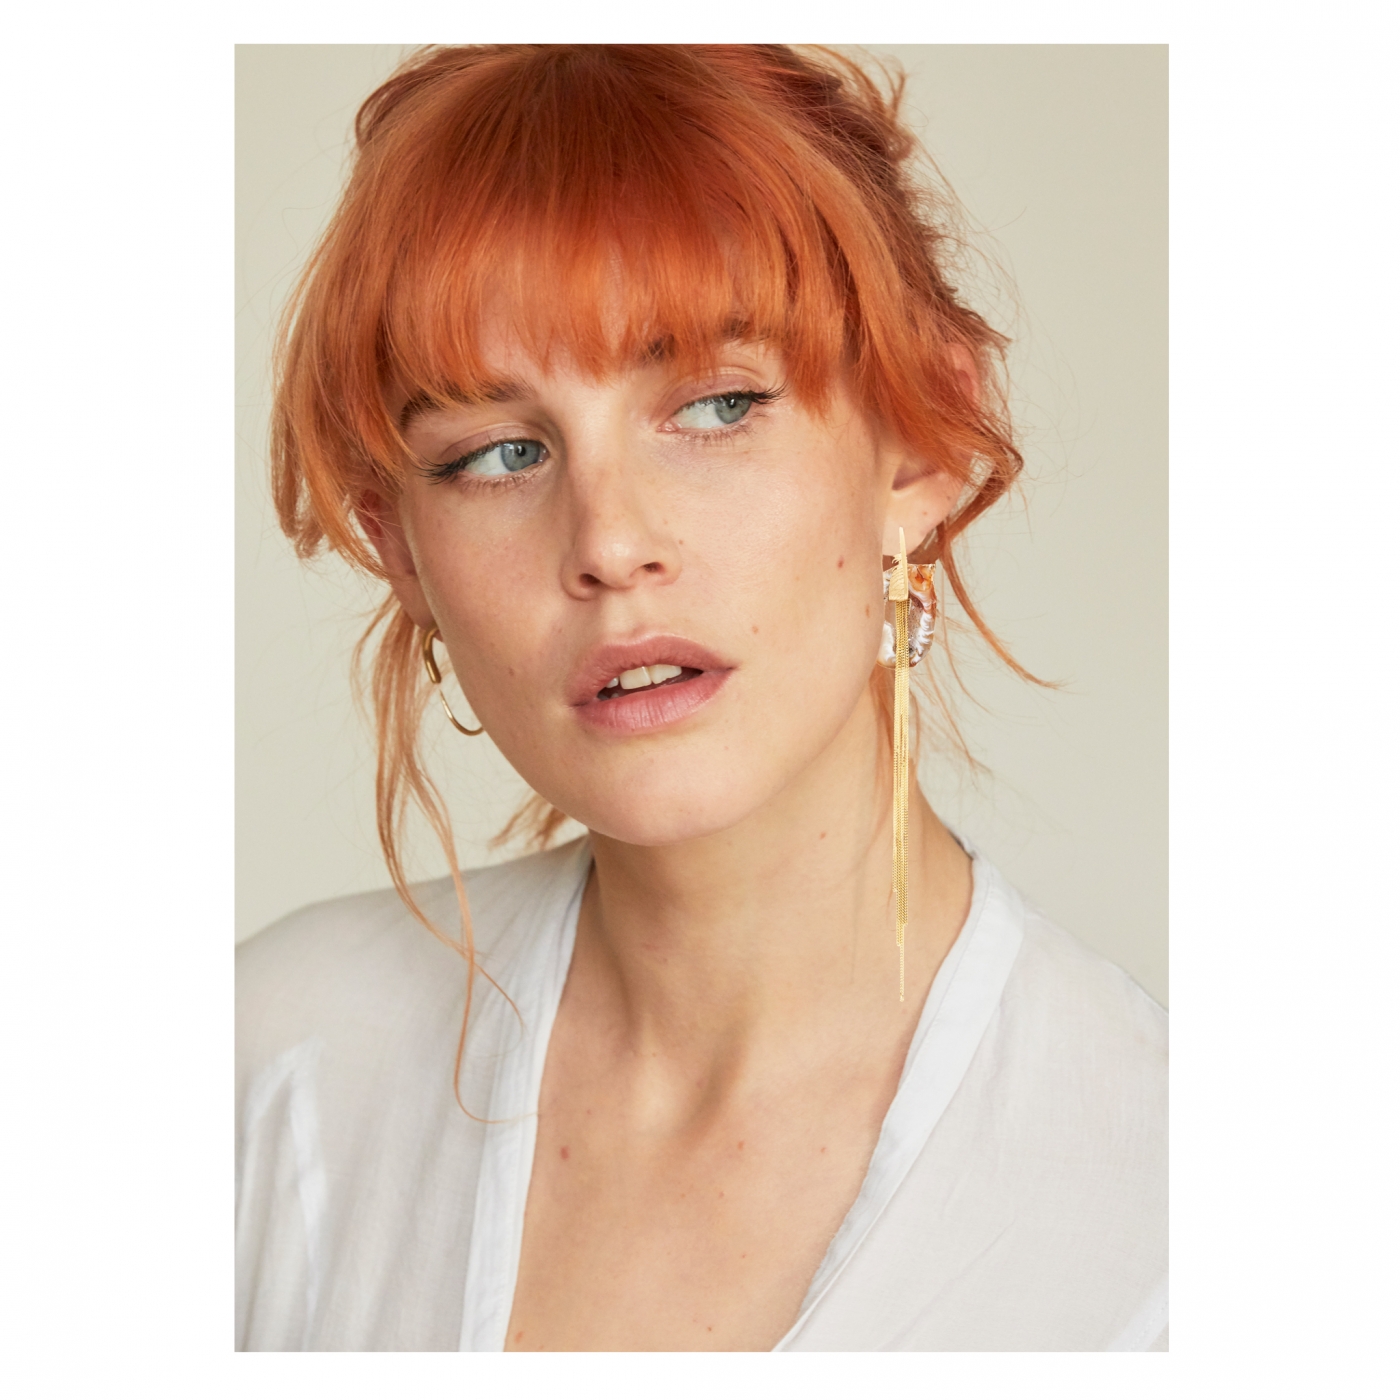 Ava wearing agate earrings by William Cheshire London Jeweller